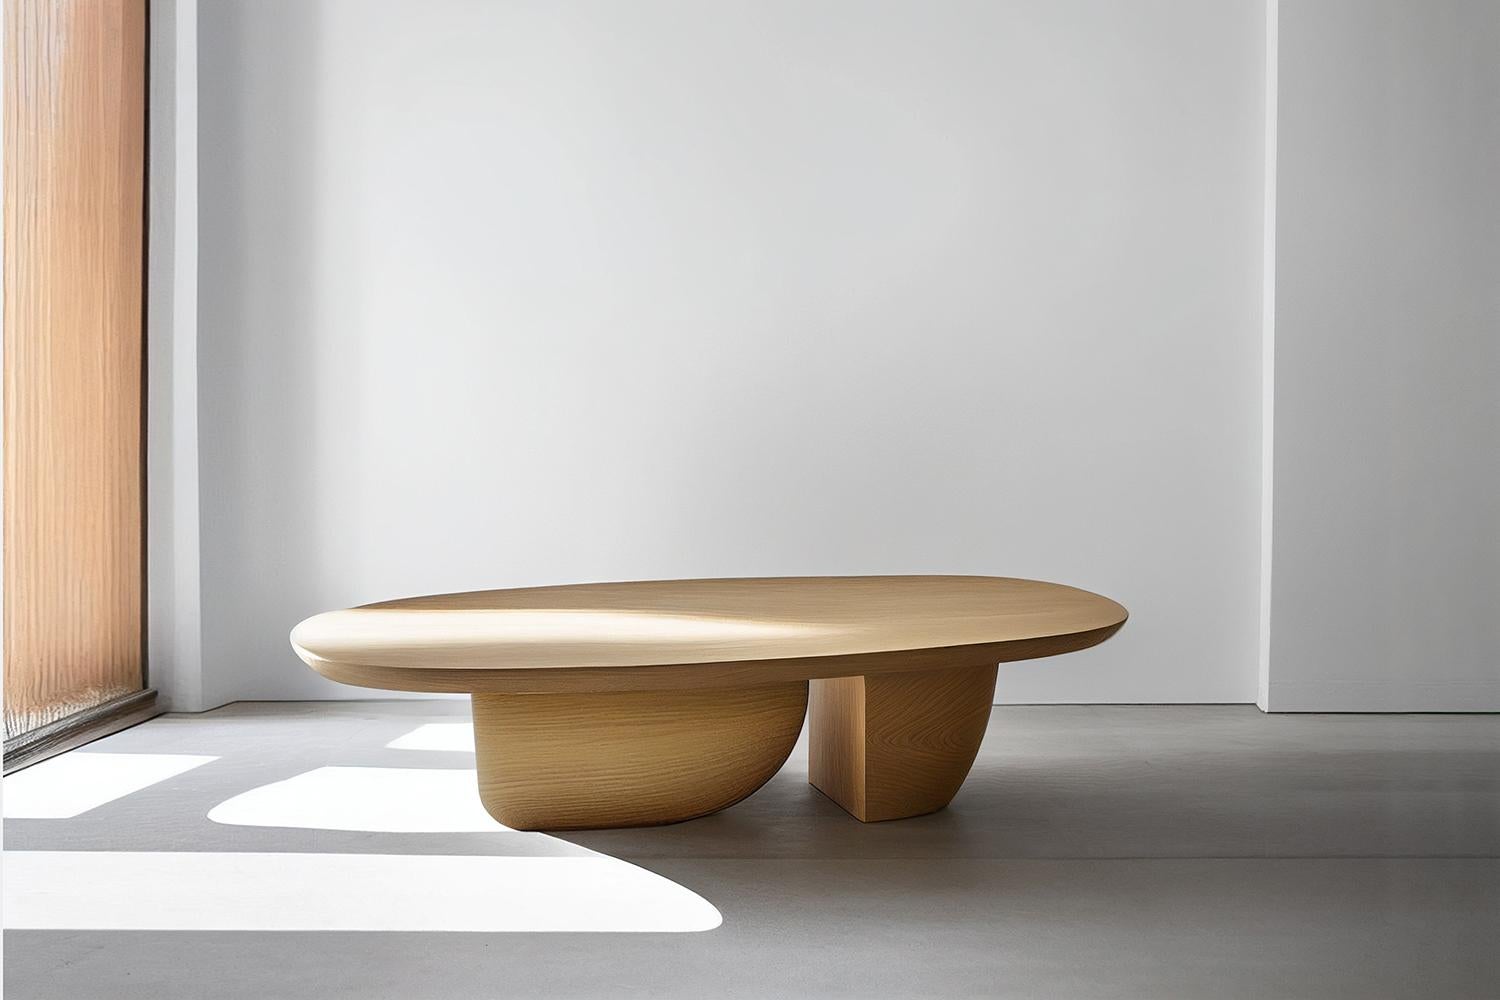 Fishes is a series of sculptural coffee tables inspired by the famous Fish (1930) sculpture of Rumanian artist Constantin Brancusi. Brancusi's work has been widely regarded as a masterpiece of modern art, and his Fish sculpture remain an iconic